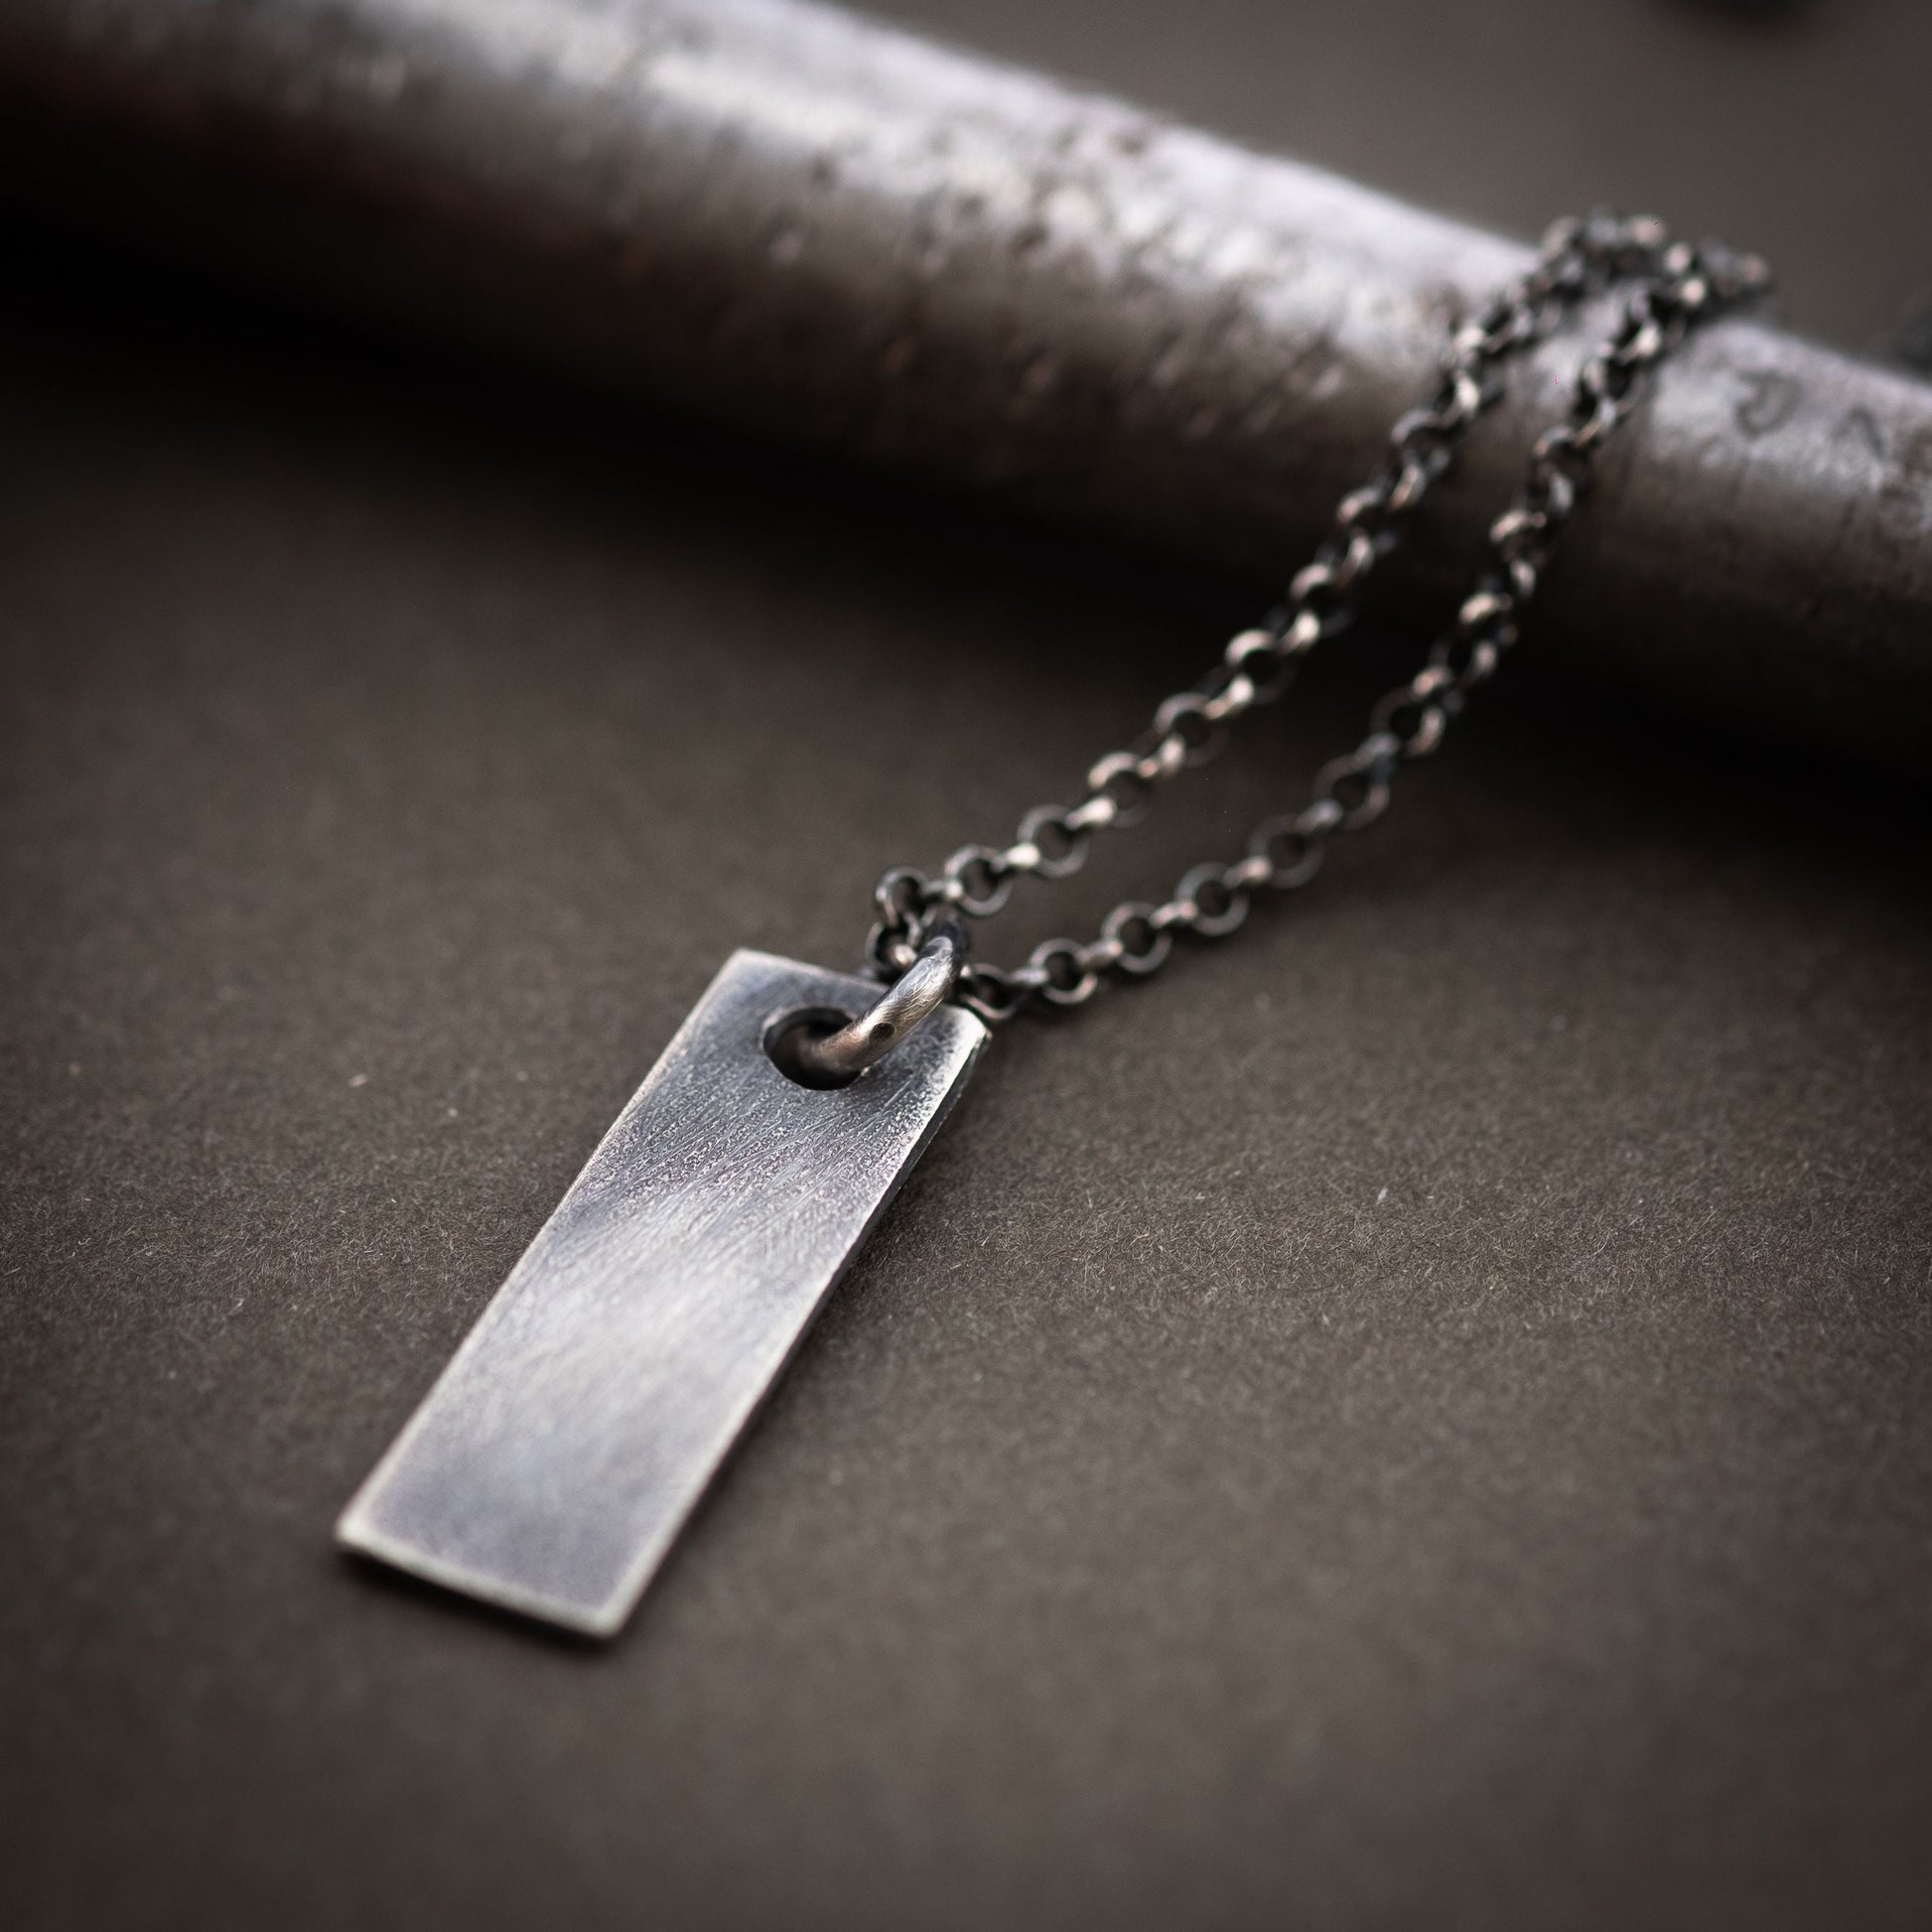 Rustic Handmade Silver necklace, Mens silver jewelry,  Minimalist jewelry, boyfriend gift, Unique gifts,  Husband gift, Gift for him